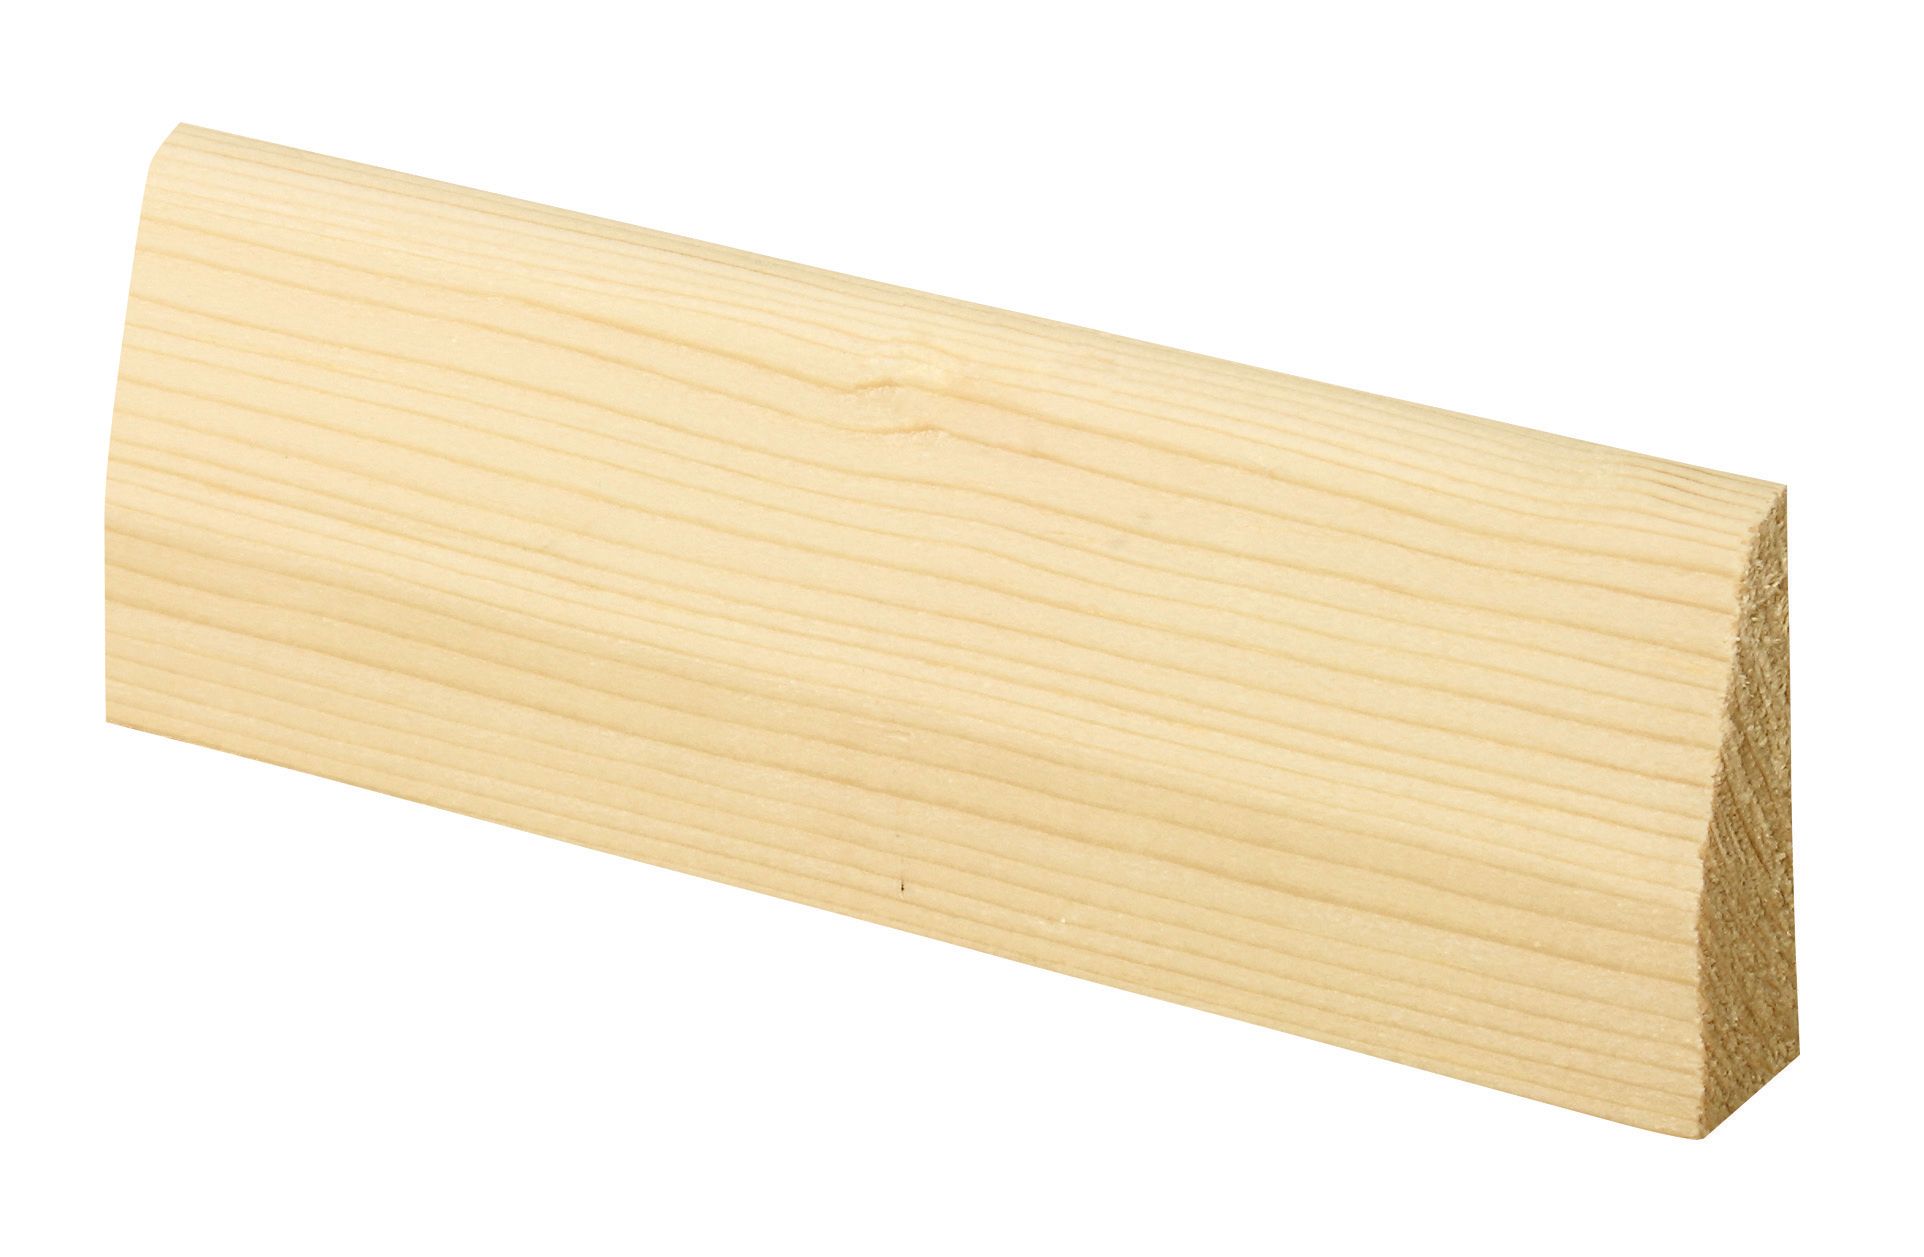 Image of Wickes Chamfered Pine Architrave - 15mm x 45mm x 2.1m Pack of 5